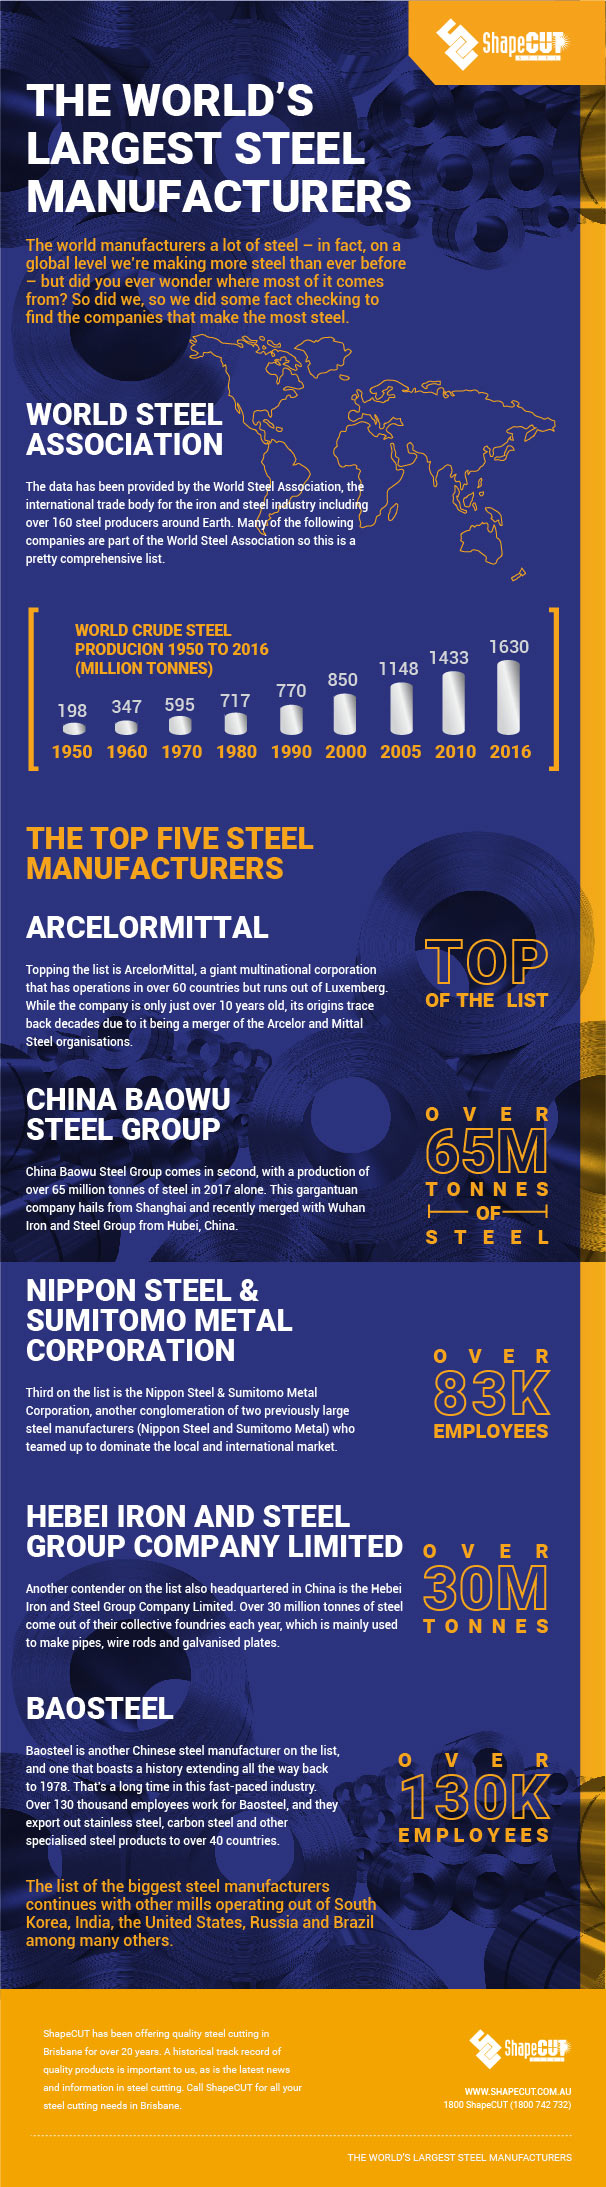 Steel manufacturers infographic